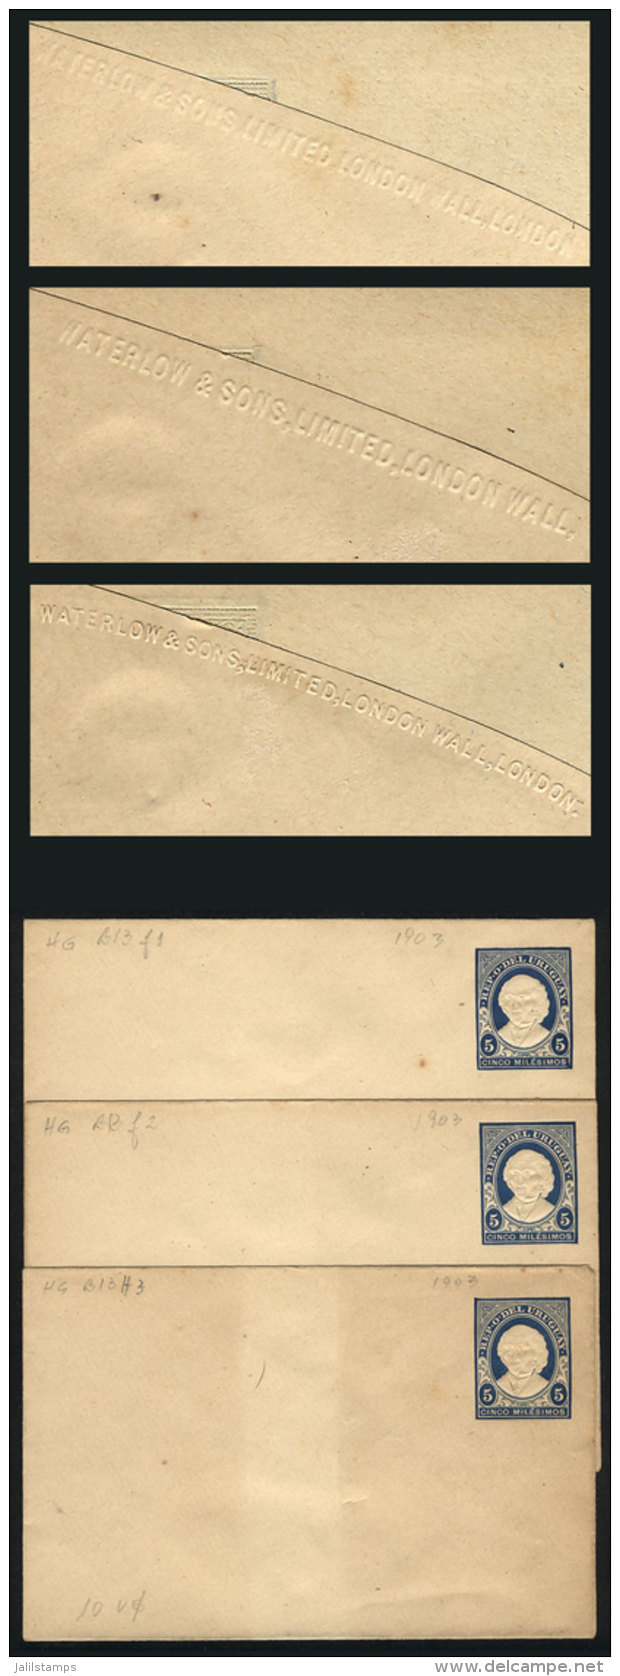 3 Old DIFFERENT Stationery Envelopes: HG.13 In 3 Different Types: Large Letters On Back Below The Flap With Text... - Uruguay